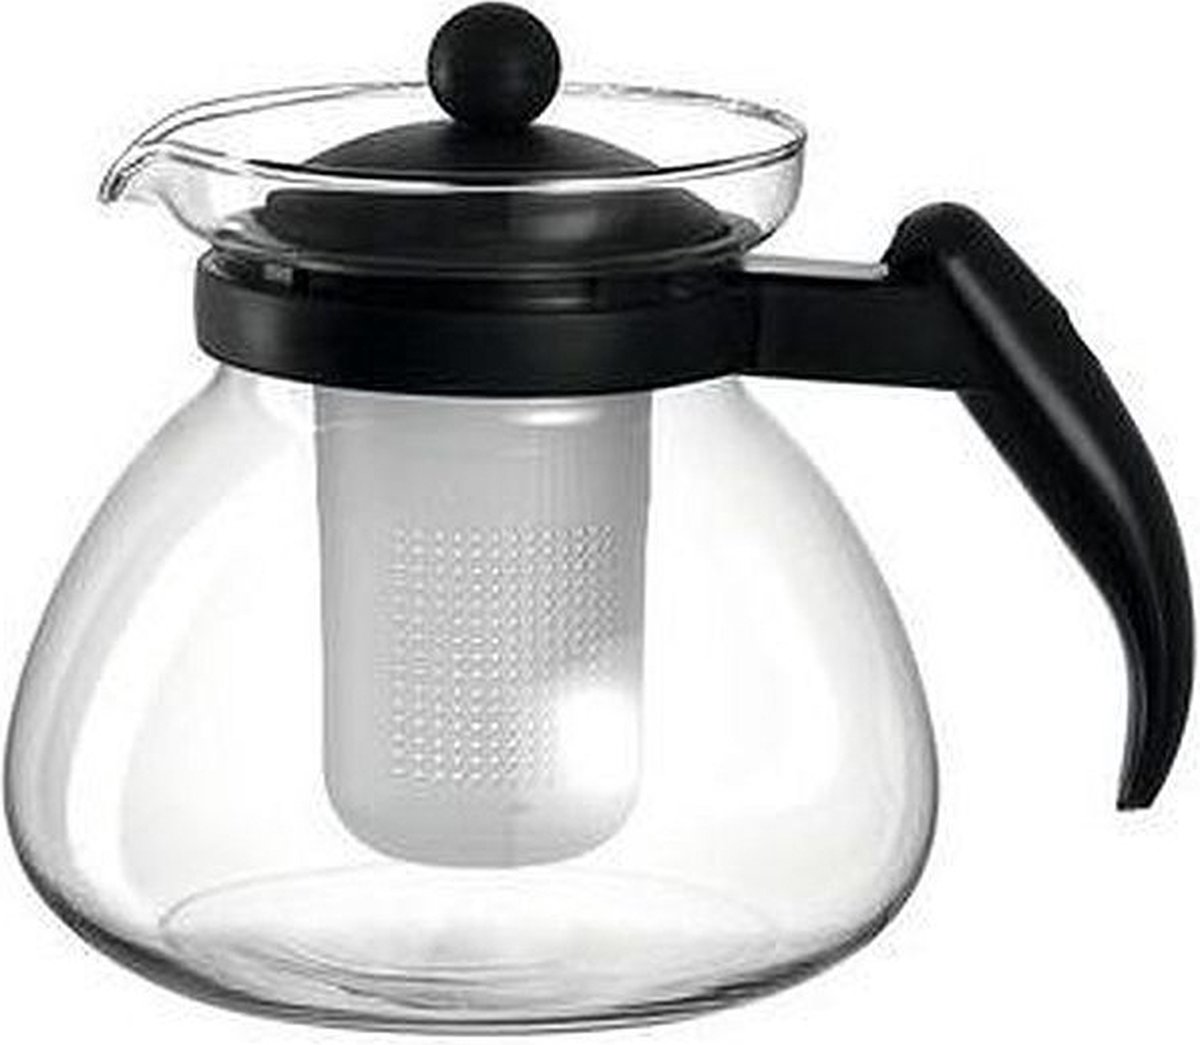 Cookinglife Theepot Duo 1.5 Liter